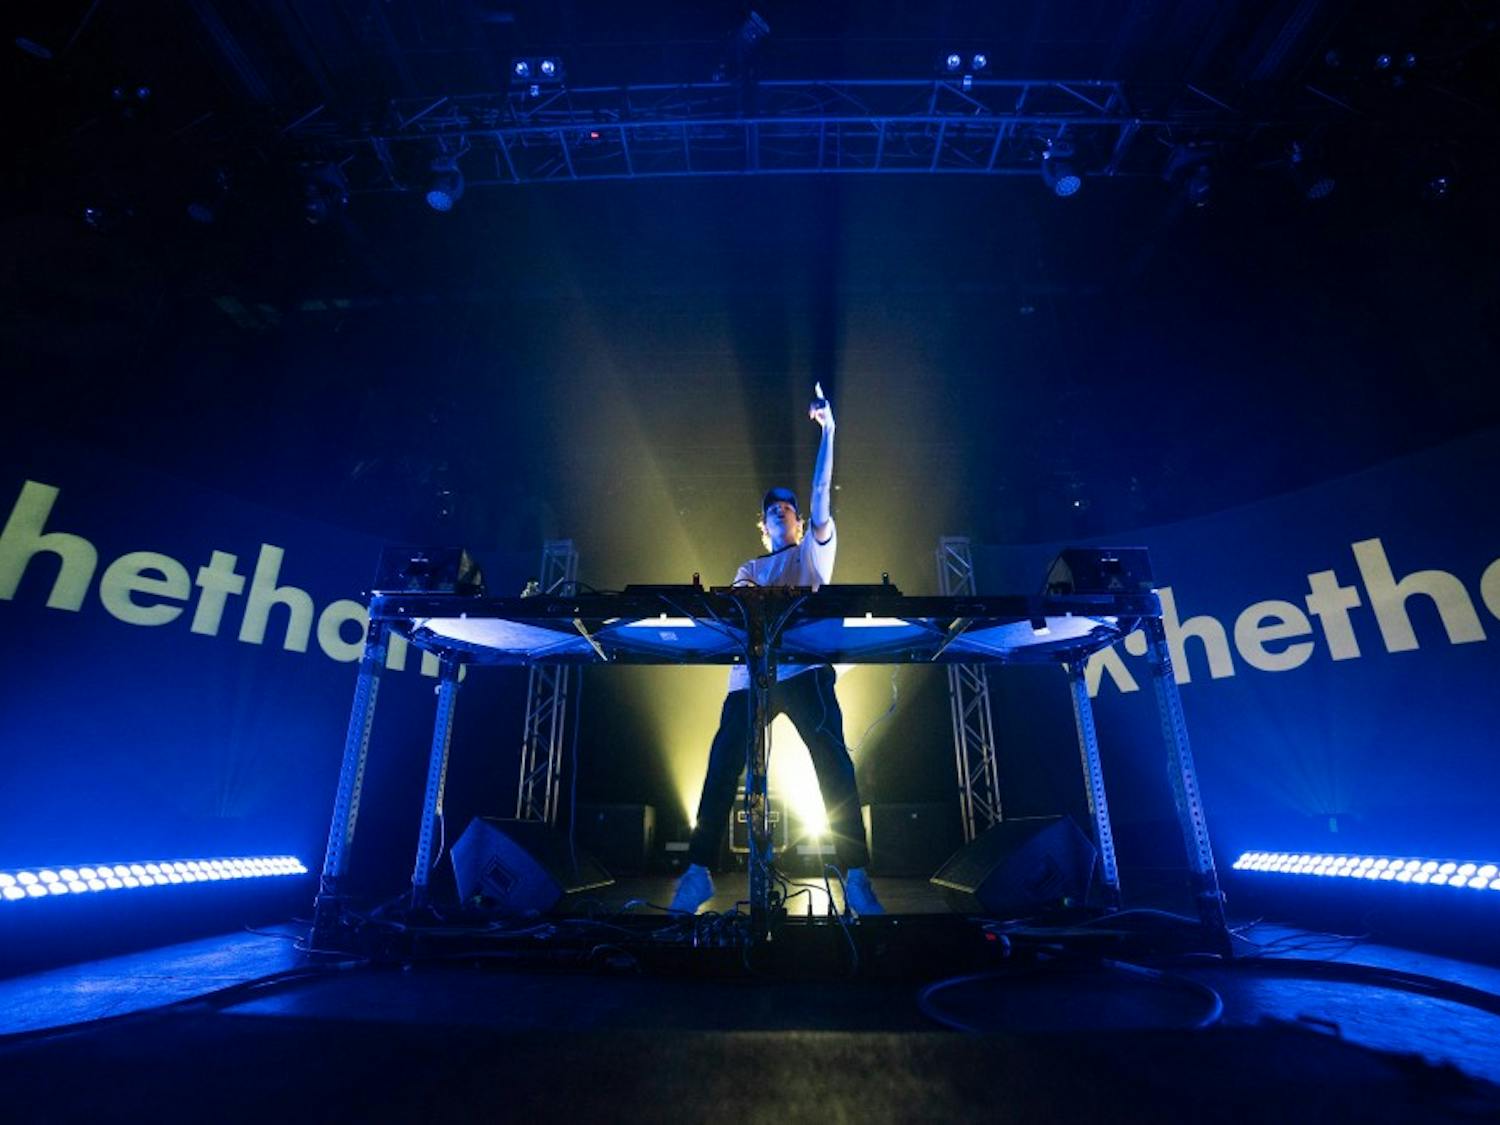 Whethan brought original tracks and refined remixes to his entertaining set.